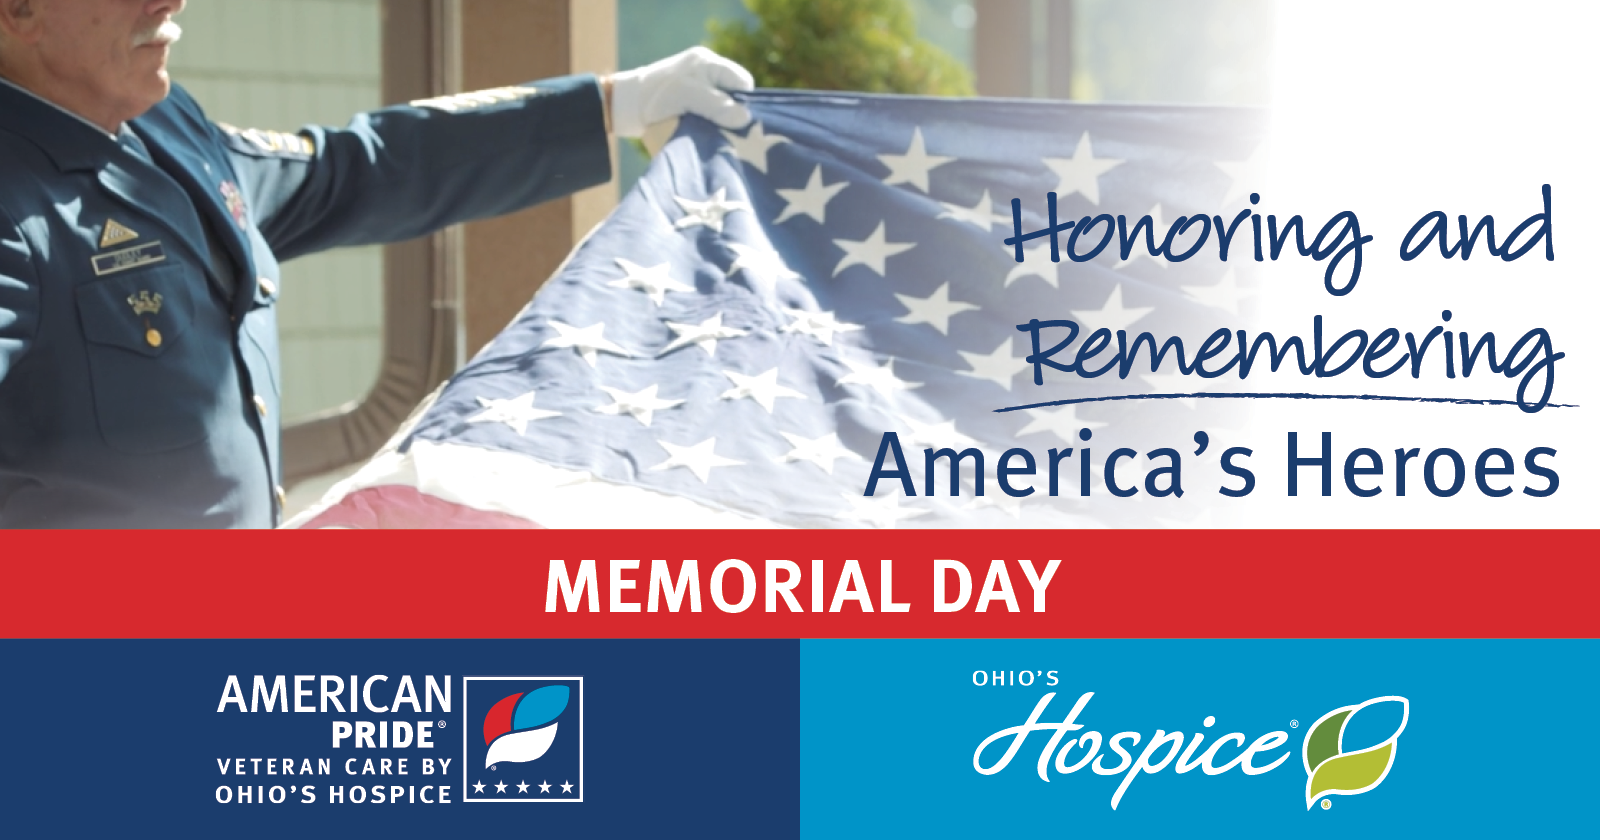 Honoring and Remembering America's Heroes on Memorial Day - Ohio's Hospice